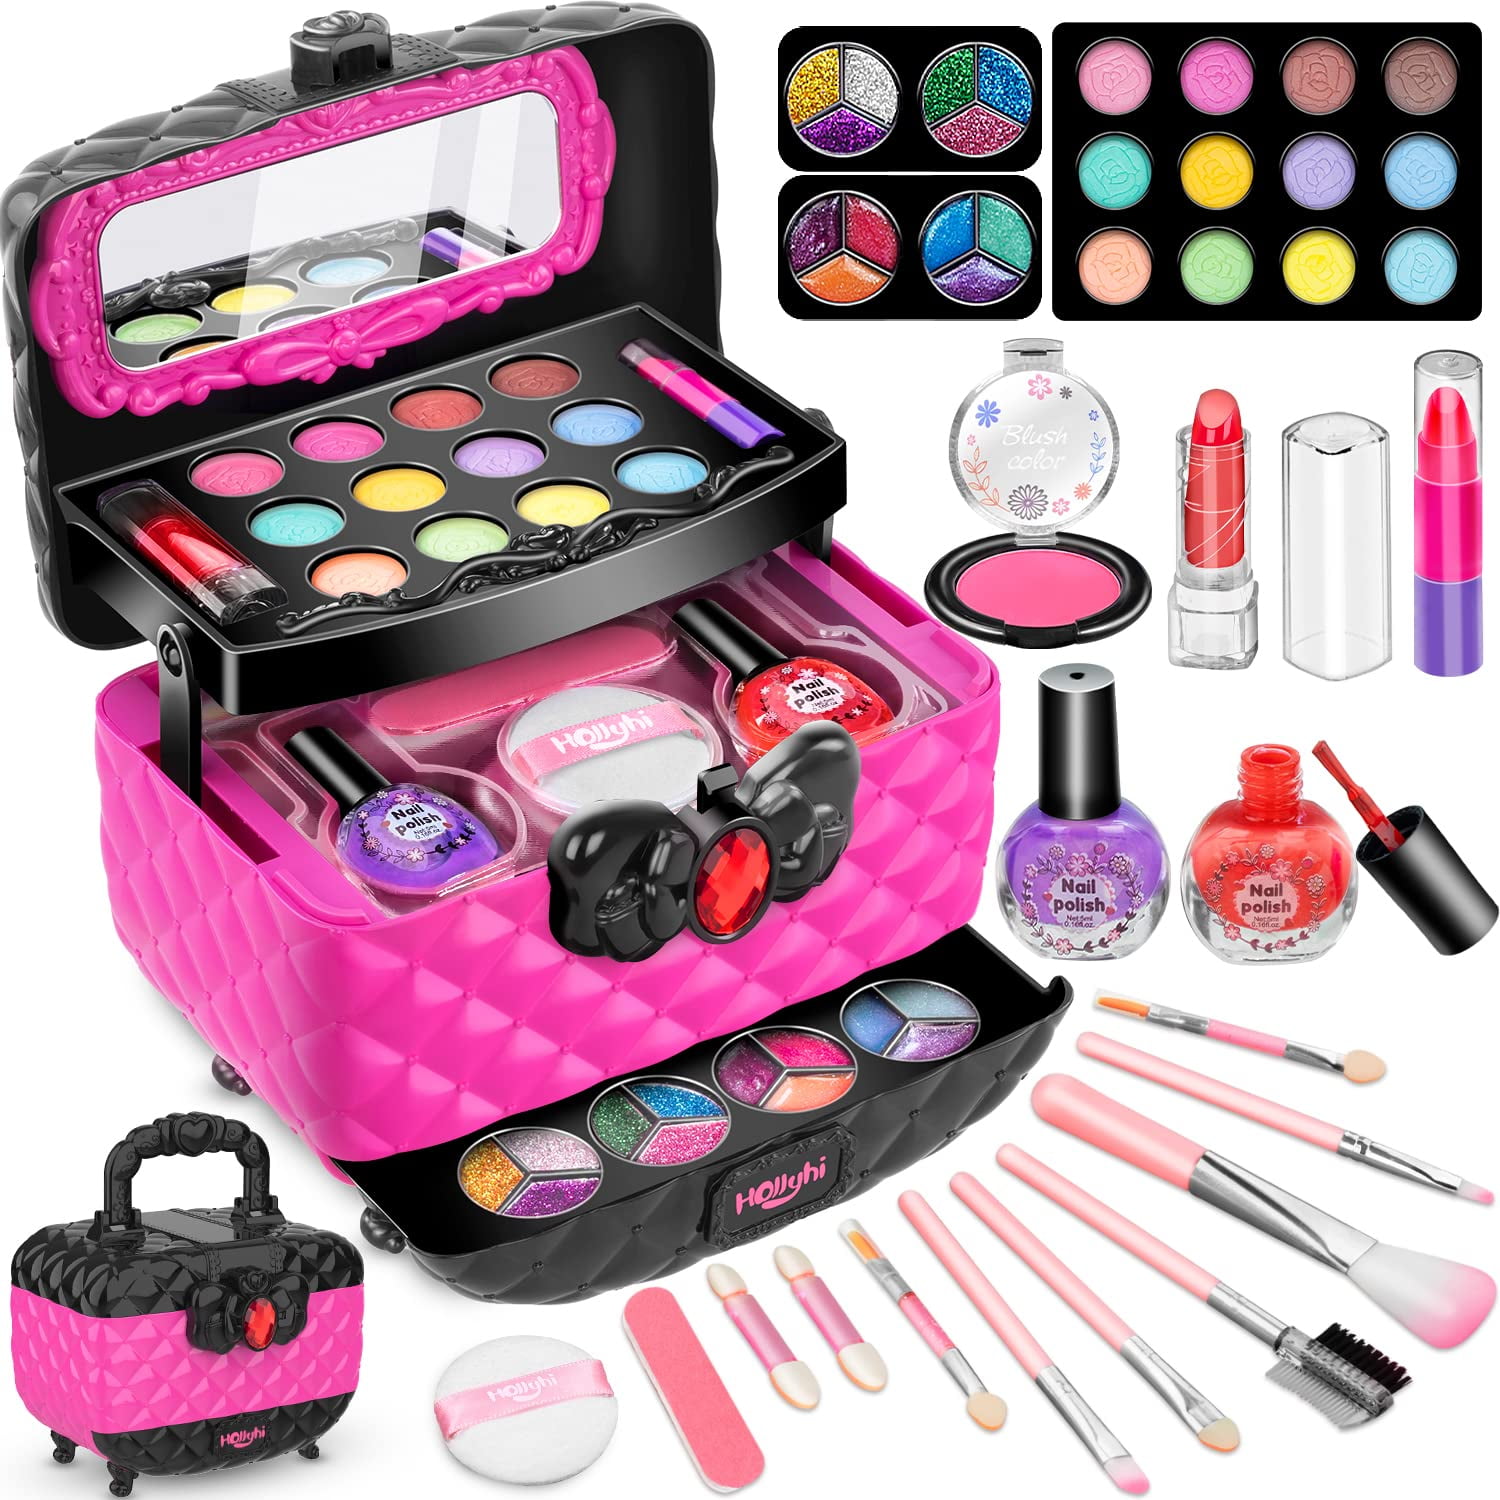 Kids Pretend Makeup Kit with Cosmetic Bag for Girls 3-10 Year Old -  Including Pink Brushes,Eye Shadows, Lipstick,Mascare,Gittler Pot, Liquid  Foundation,Nail polish bottle and More(Not Real Makeup) 